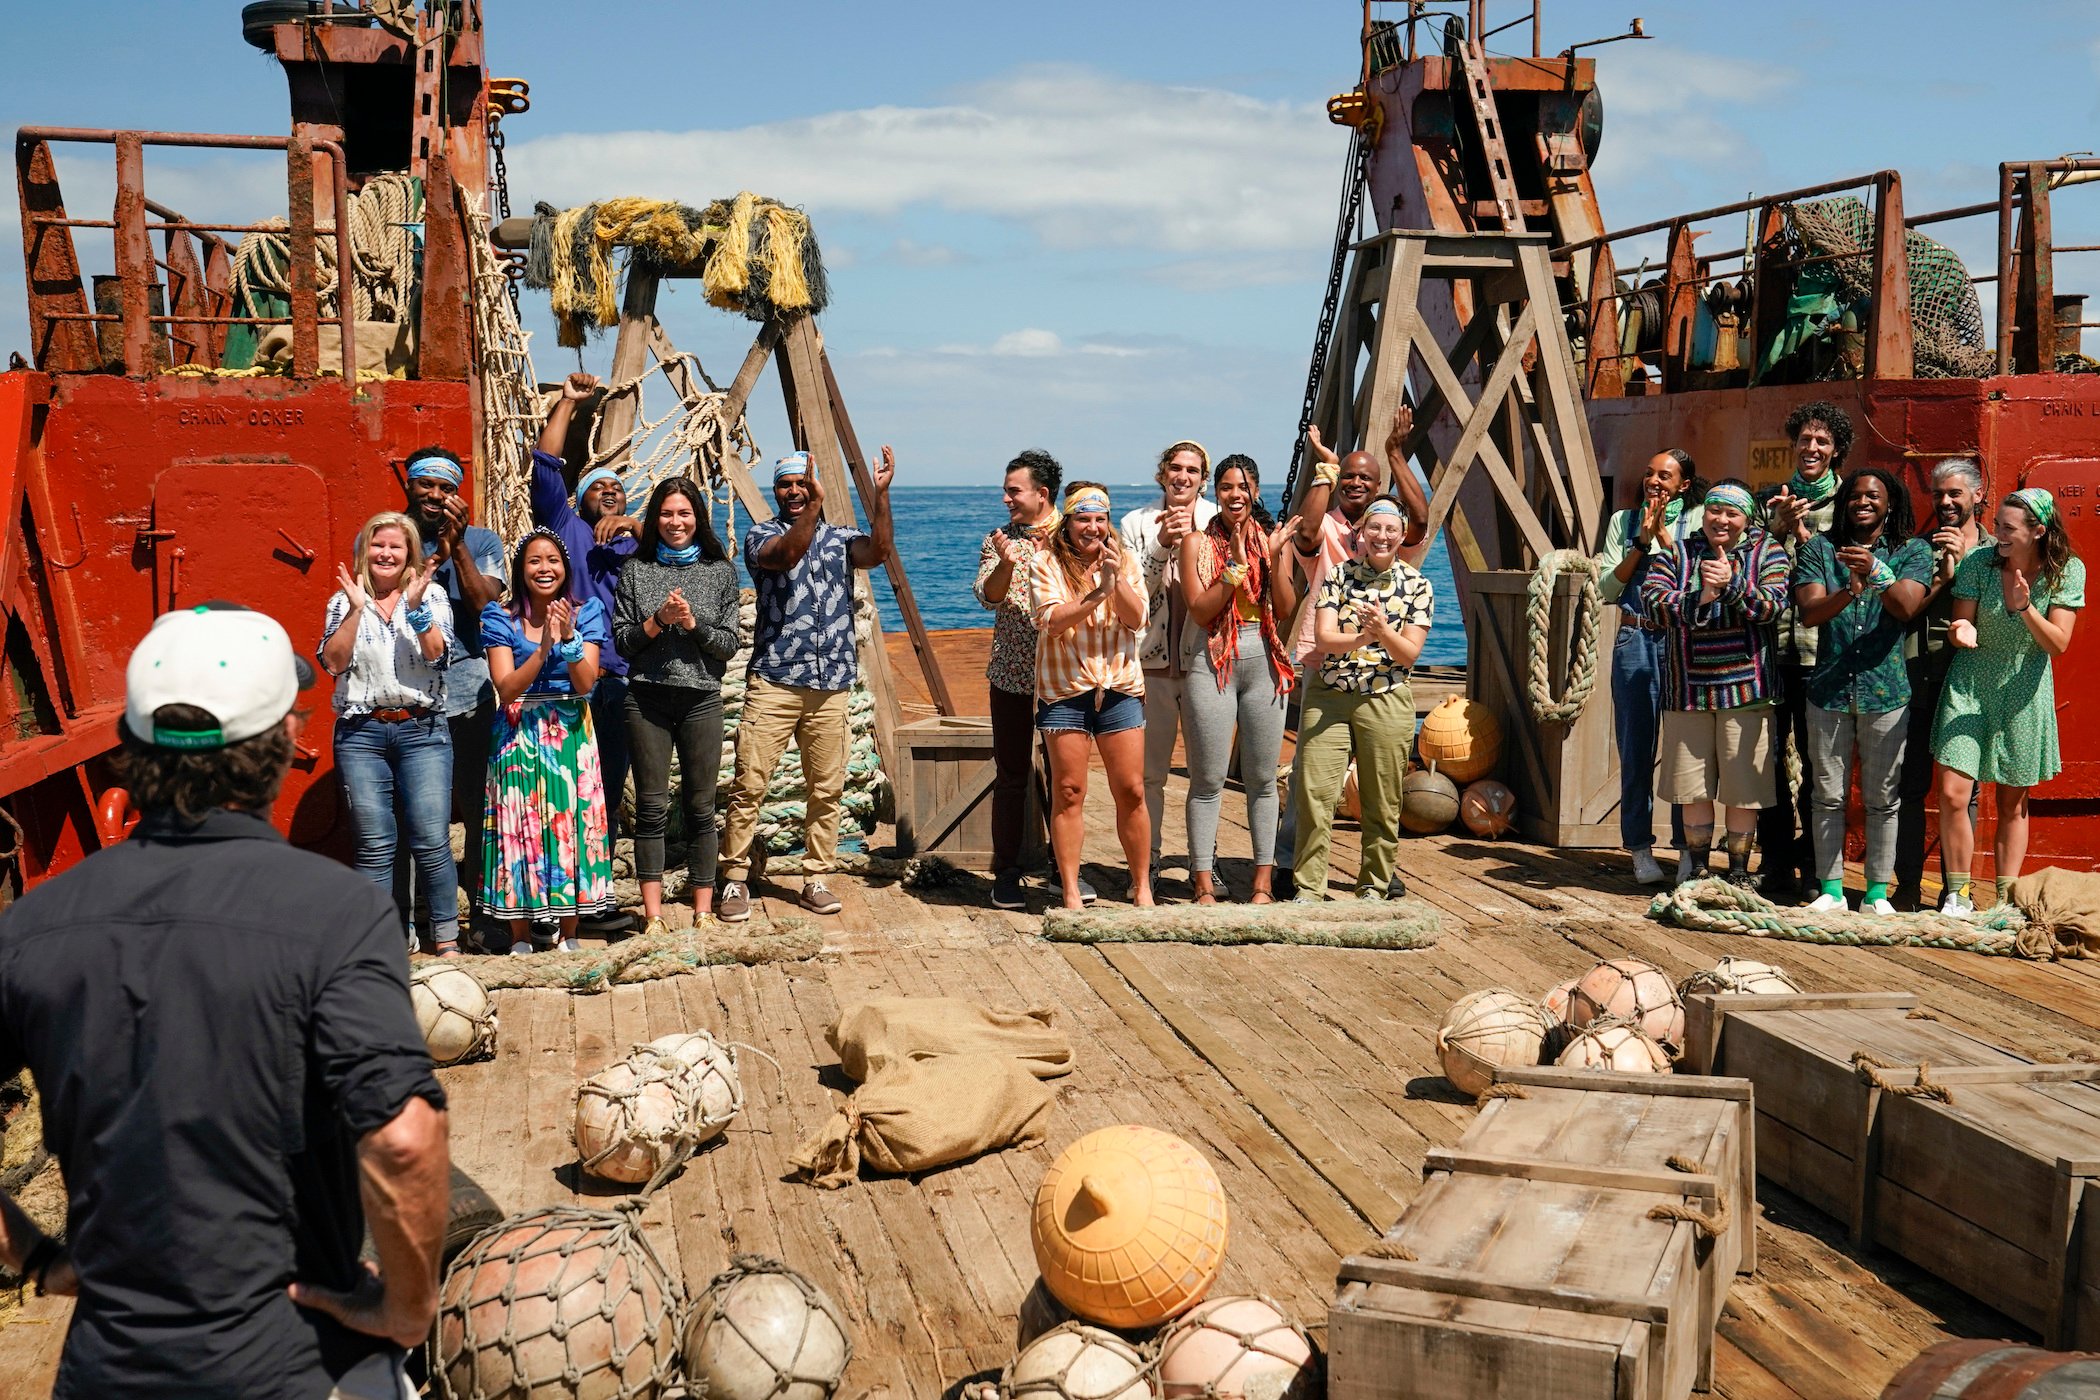 Jeff Probst and the 'Survivor' tribes on a boat from the 'Survivor' Season 41 premiere